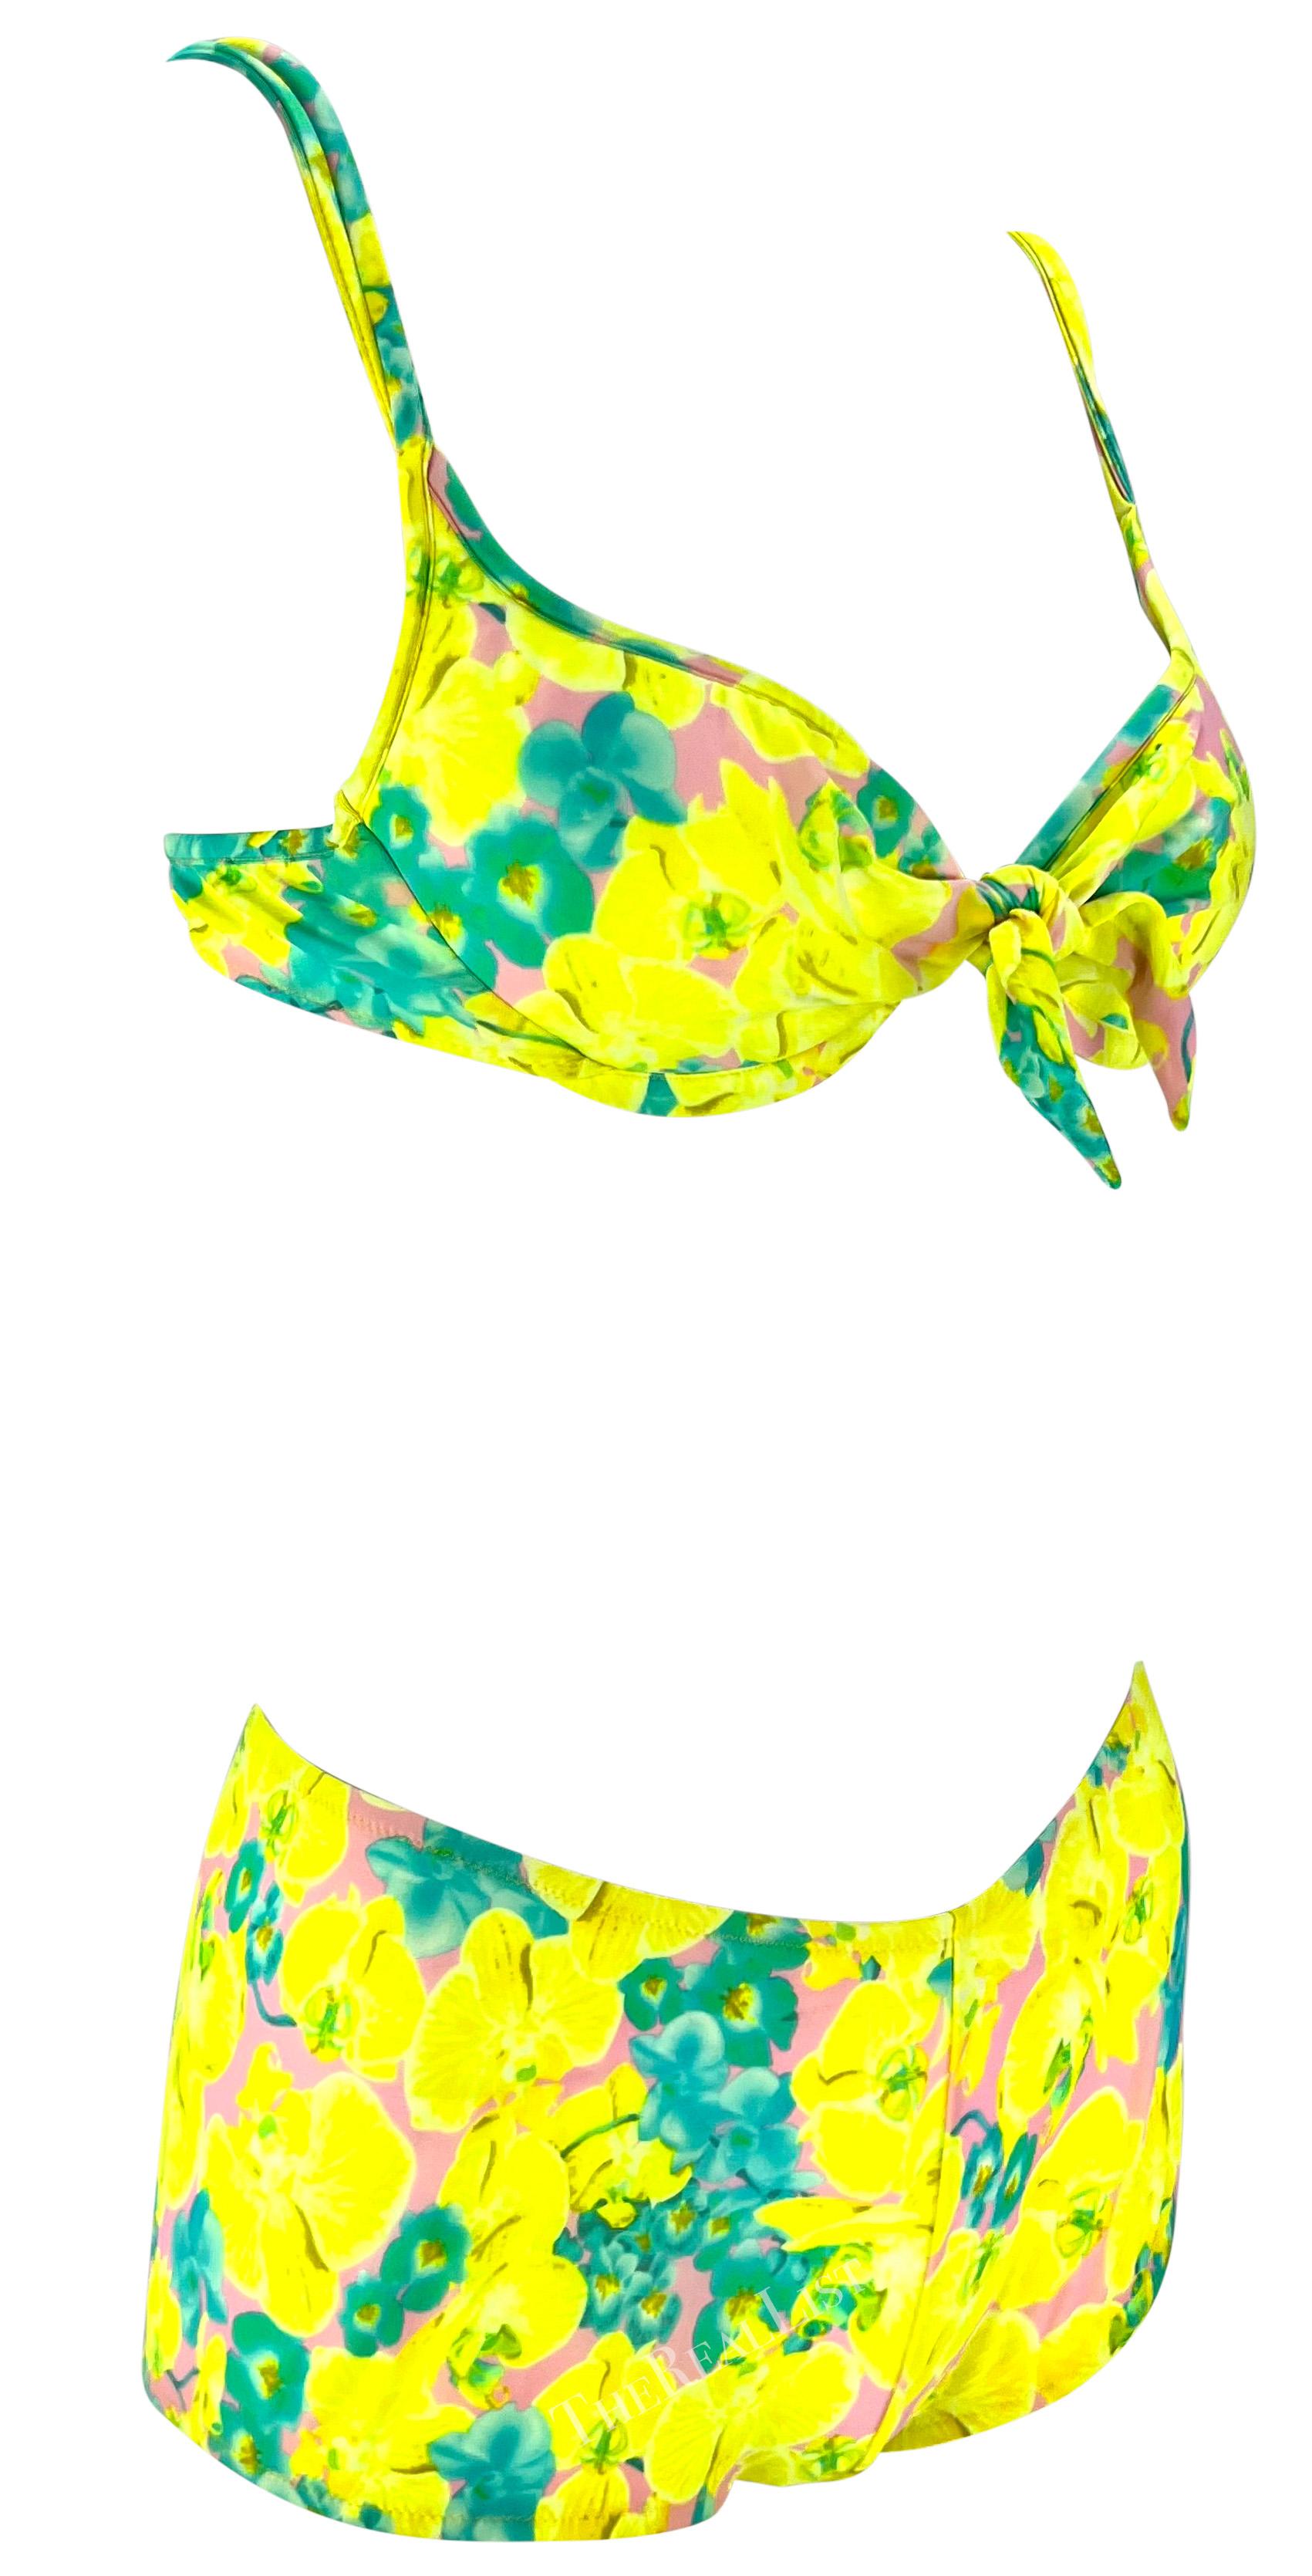 S/S 2004 Versace by Donatella Neon Orchid Yellow Floral Tie Bikini Shorts Set For Sale 1